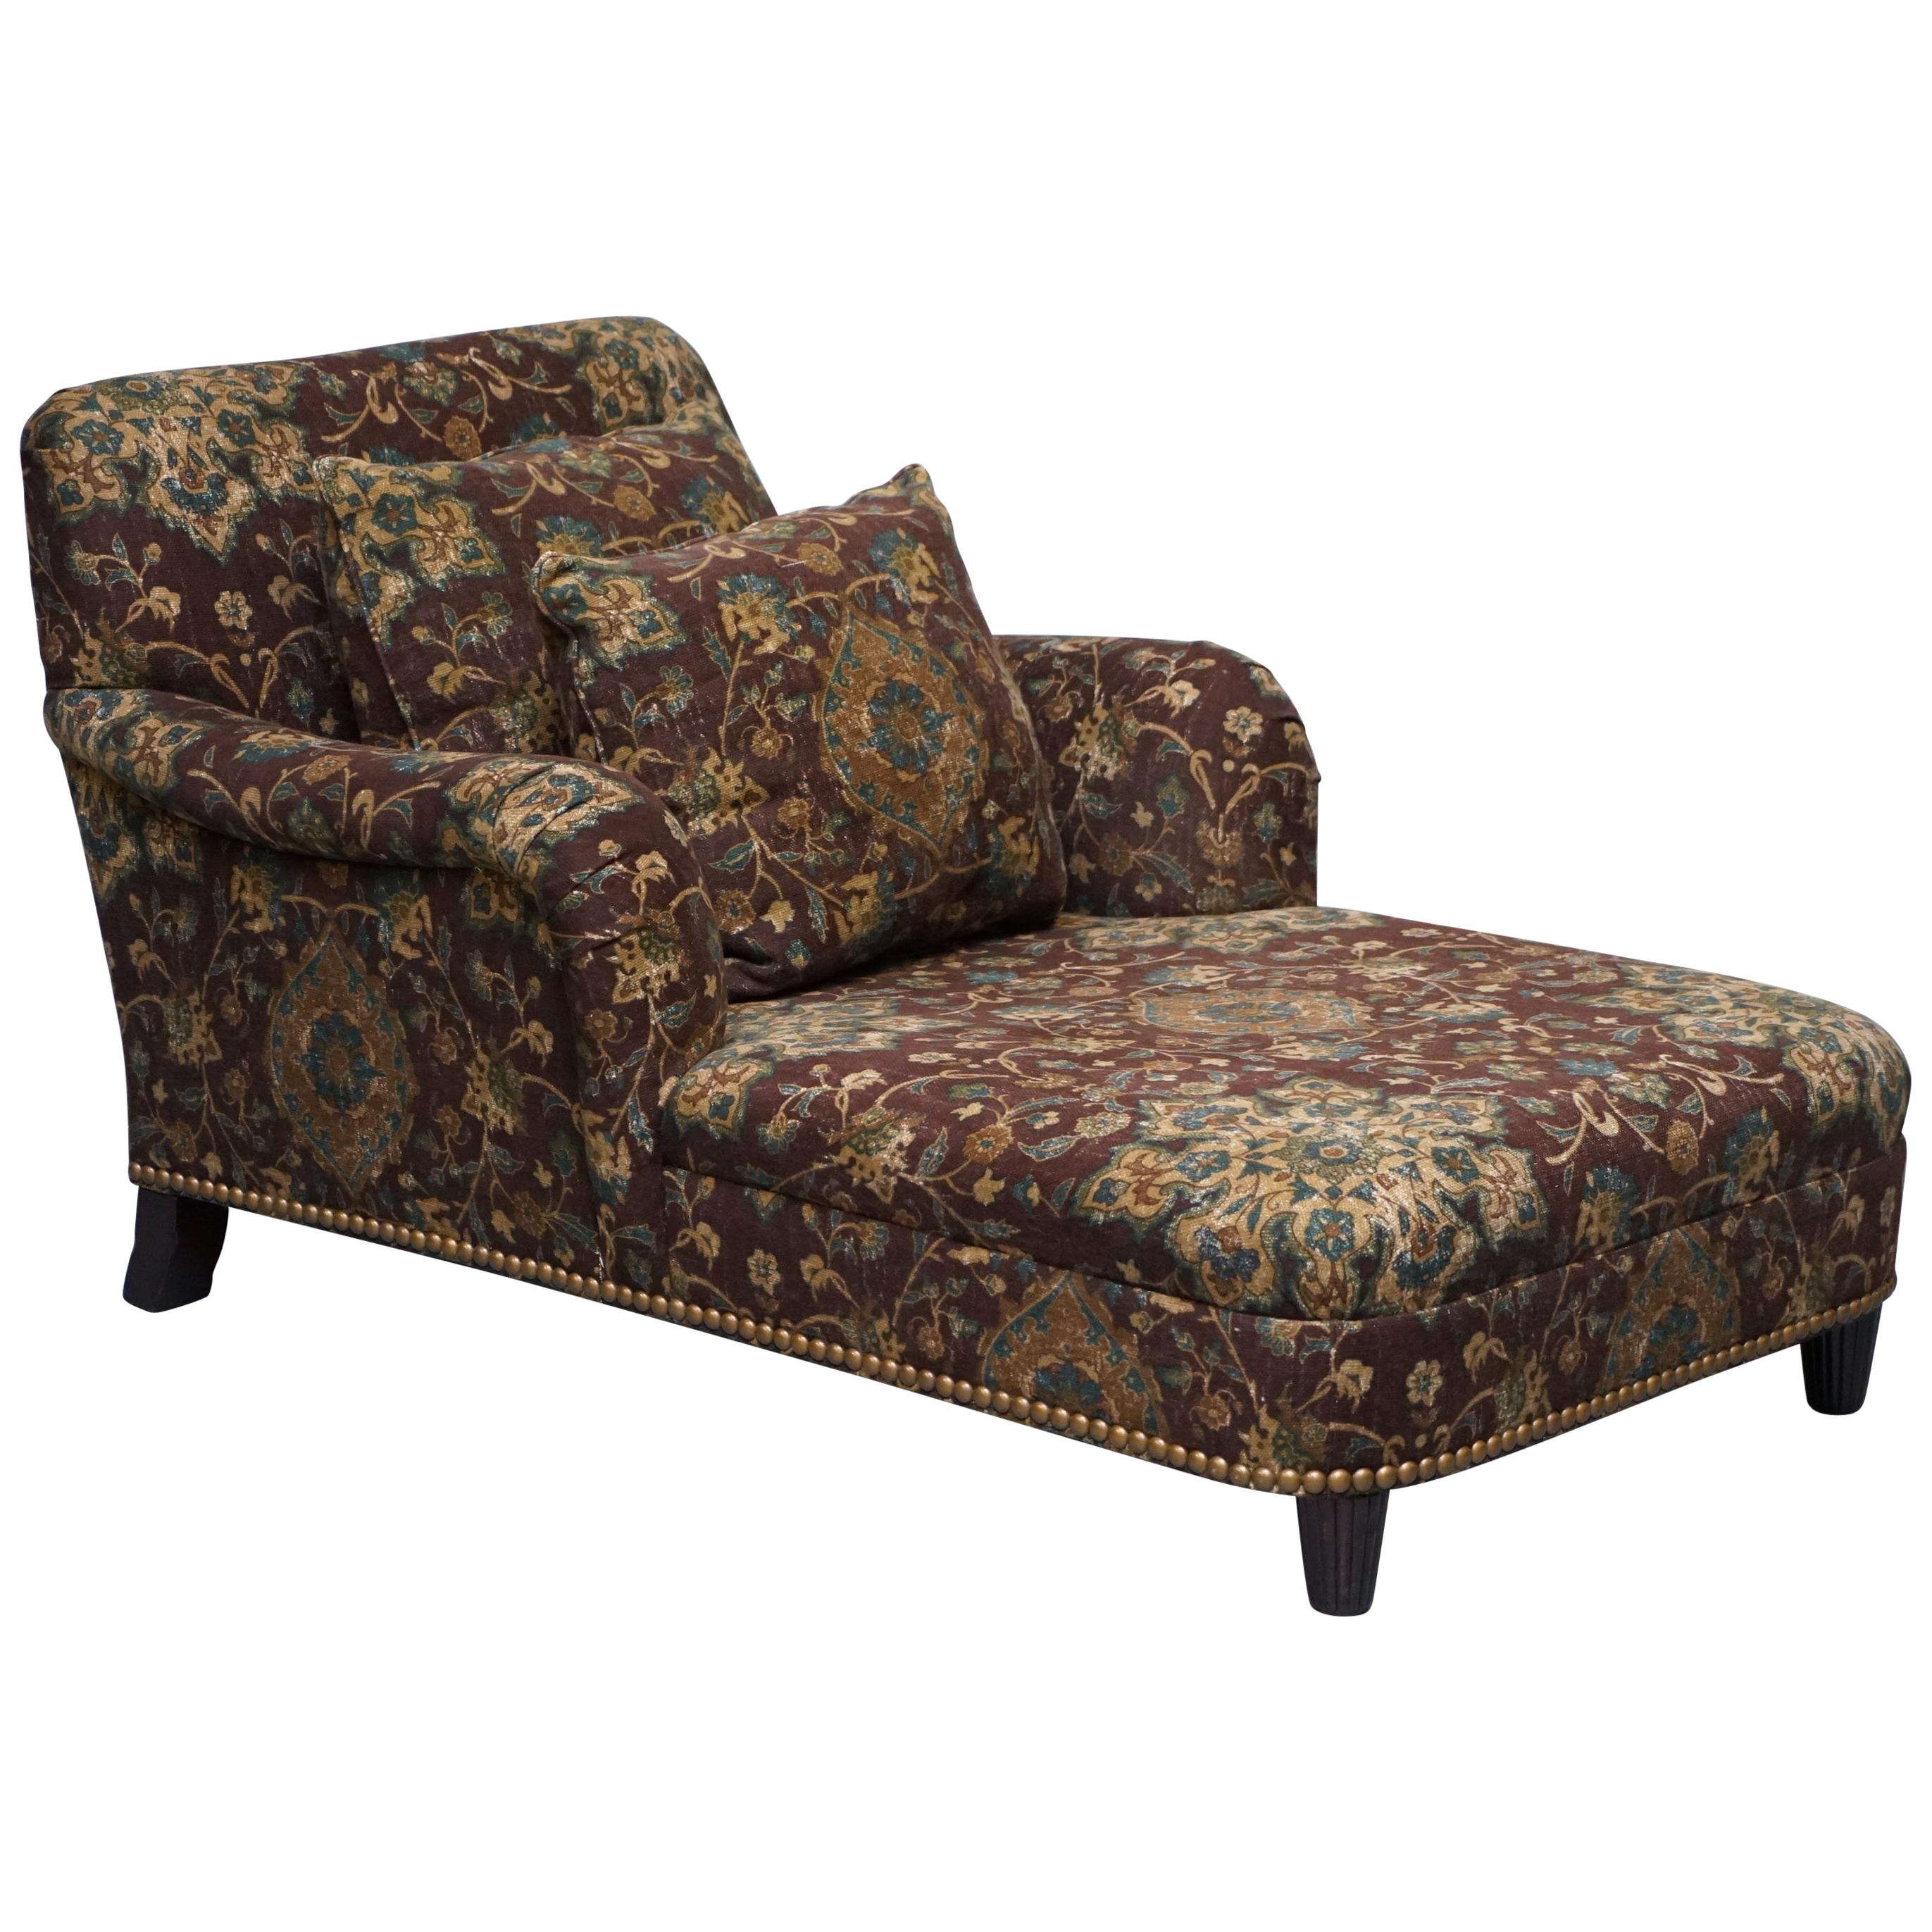 Large Oversized Ralph Lauren Chaise Lounge Sofa Armchair Floral Upholstery